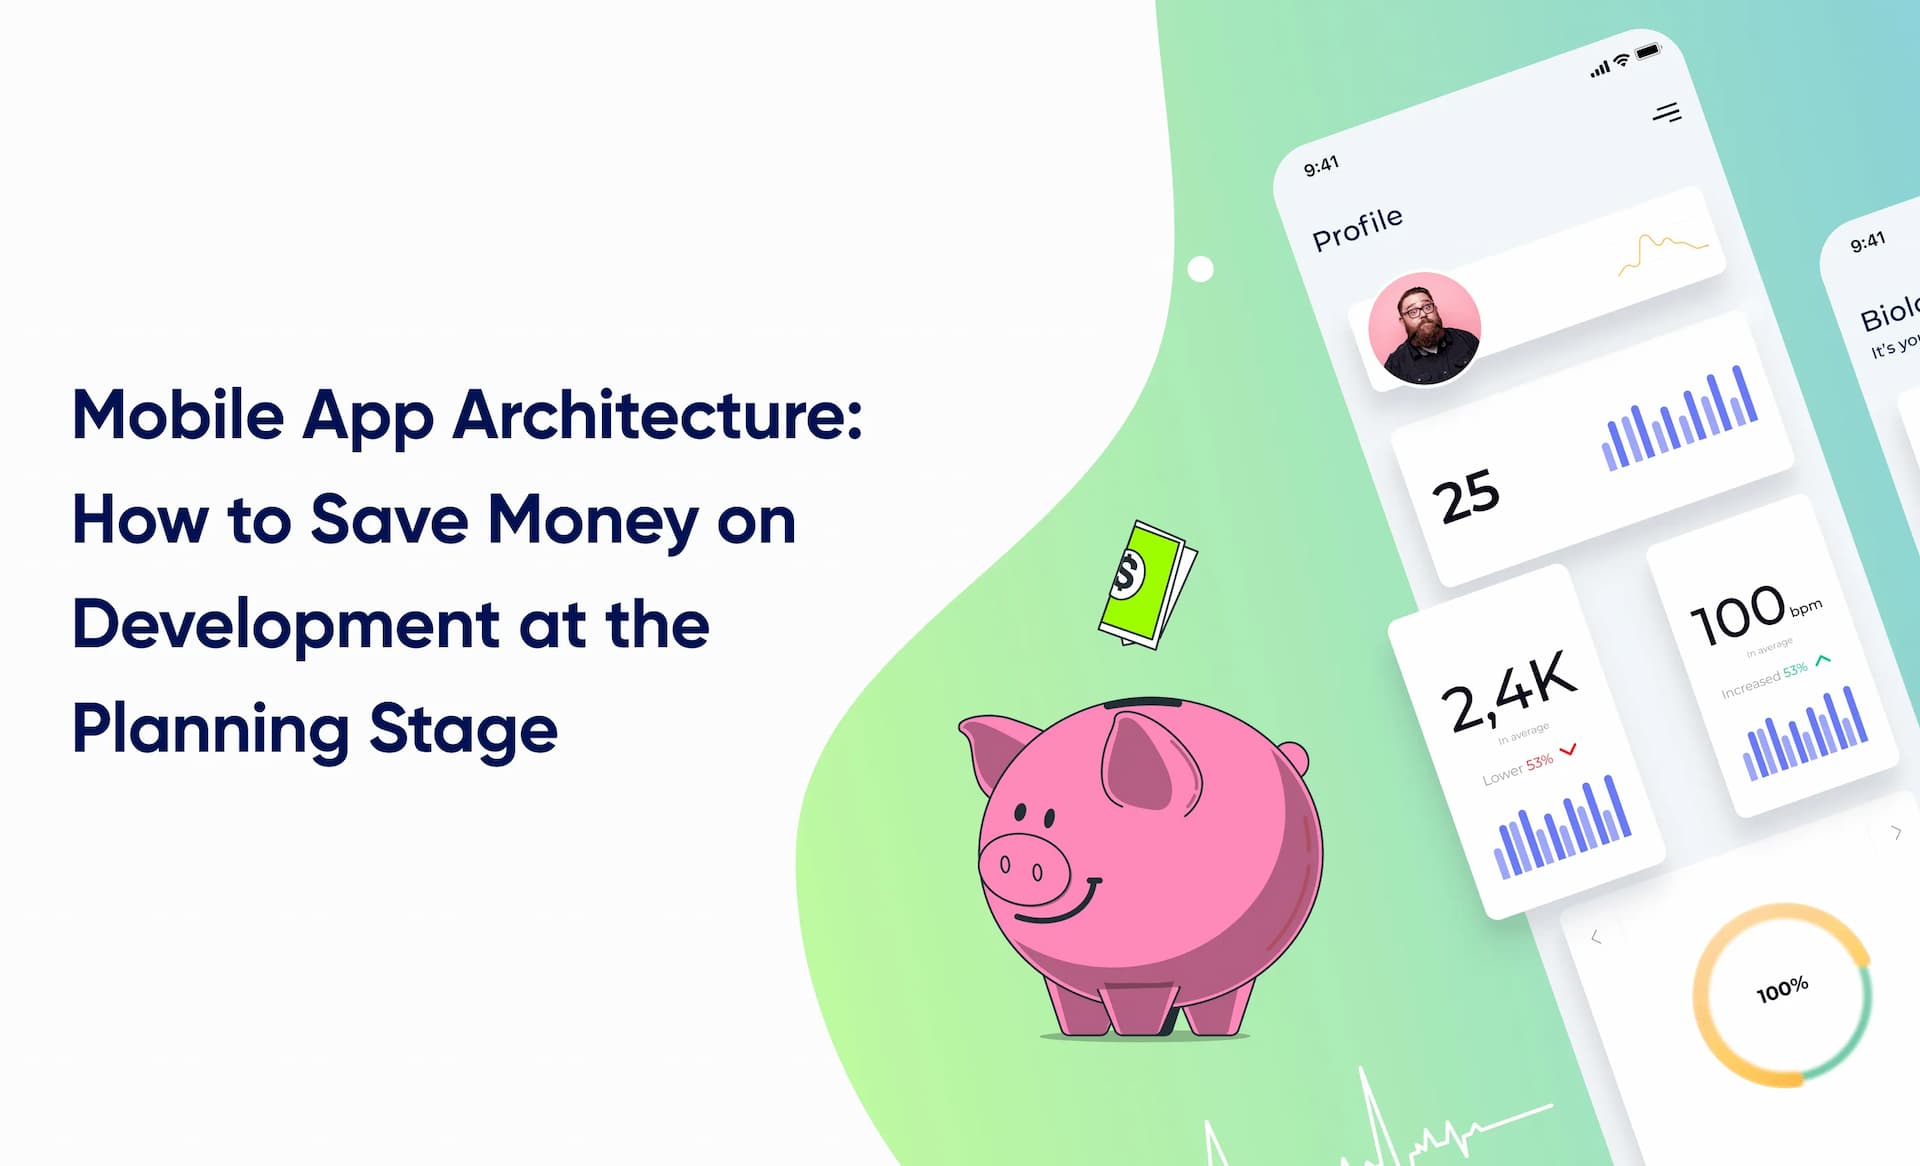 Mobile App Architecture: How to Save Money on Development at the Planning Stage